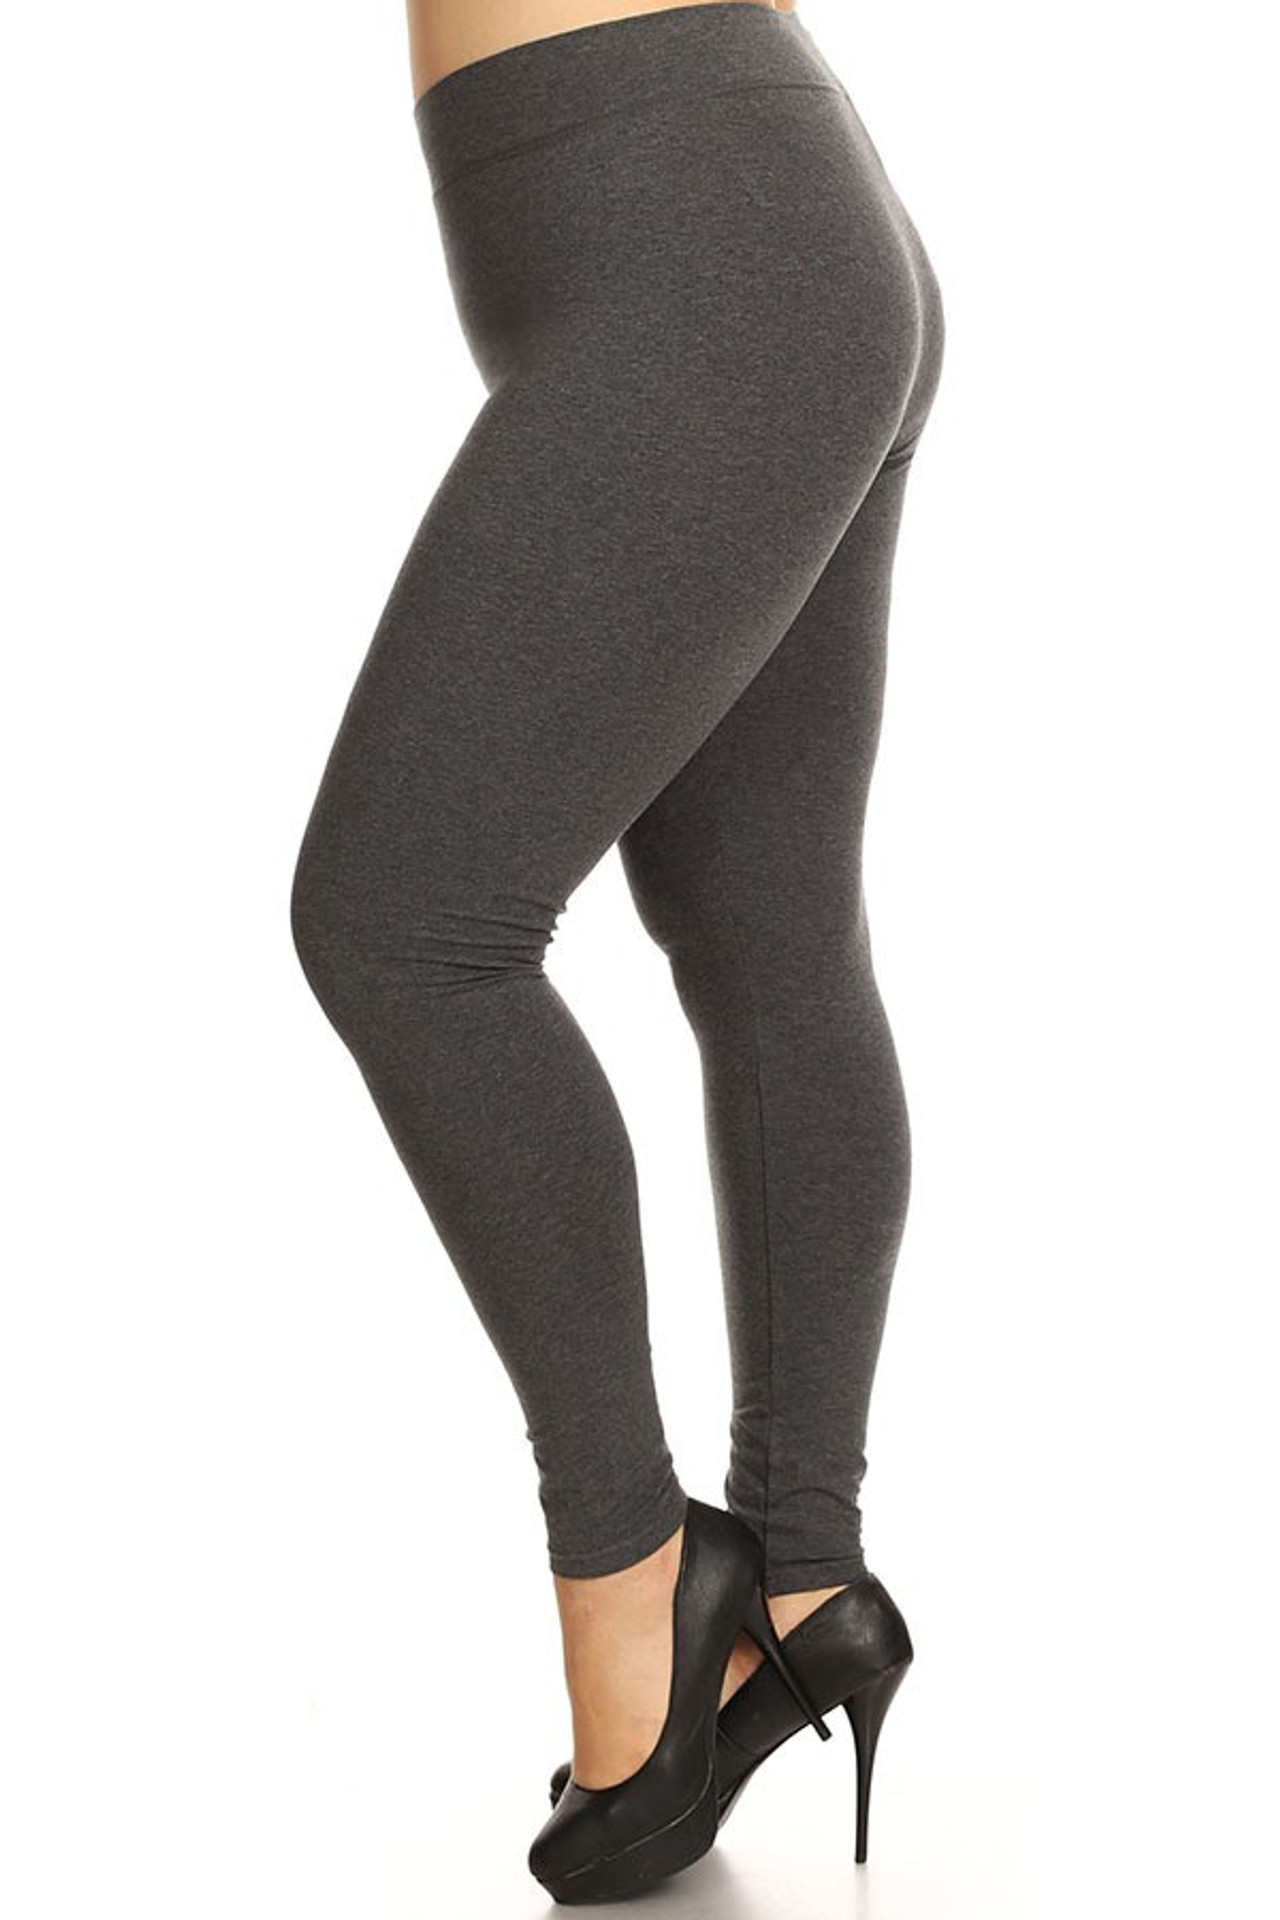 Brushed Microfiber High Waisted Plus Size Sport Leggings with Side